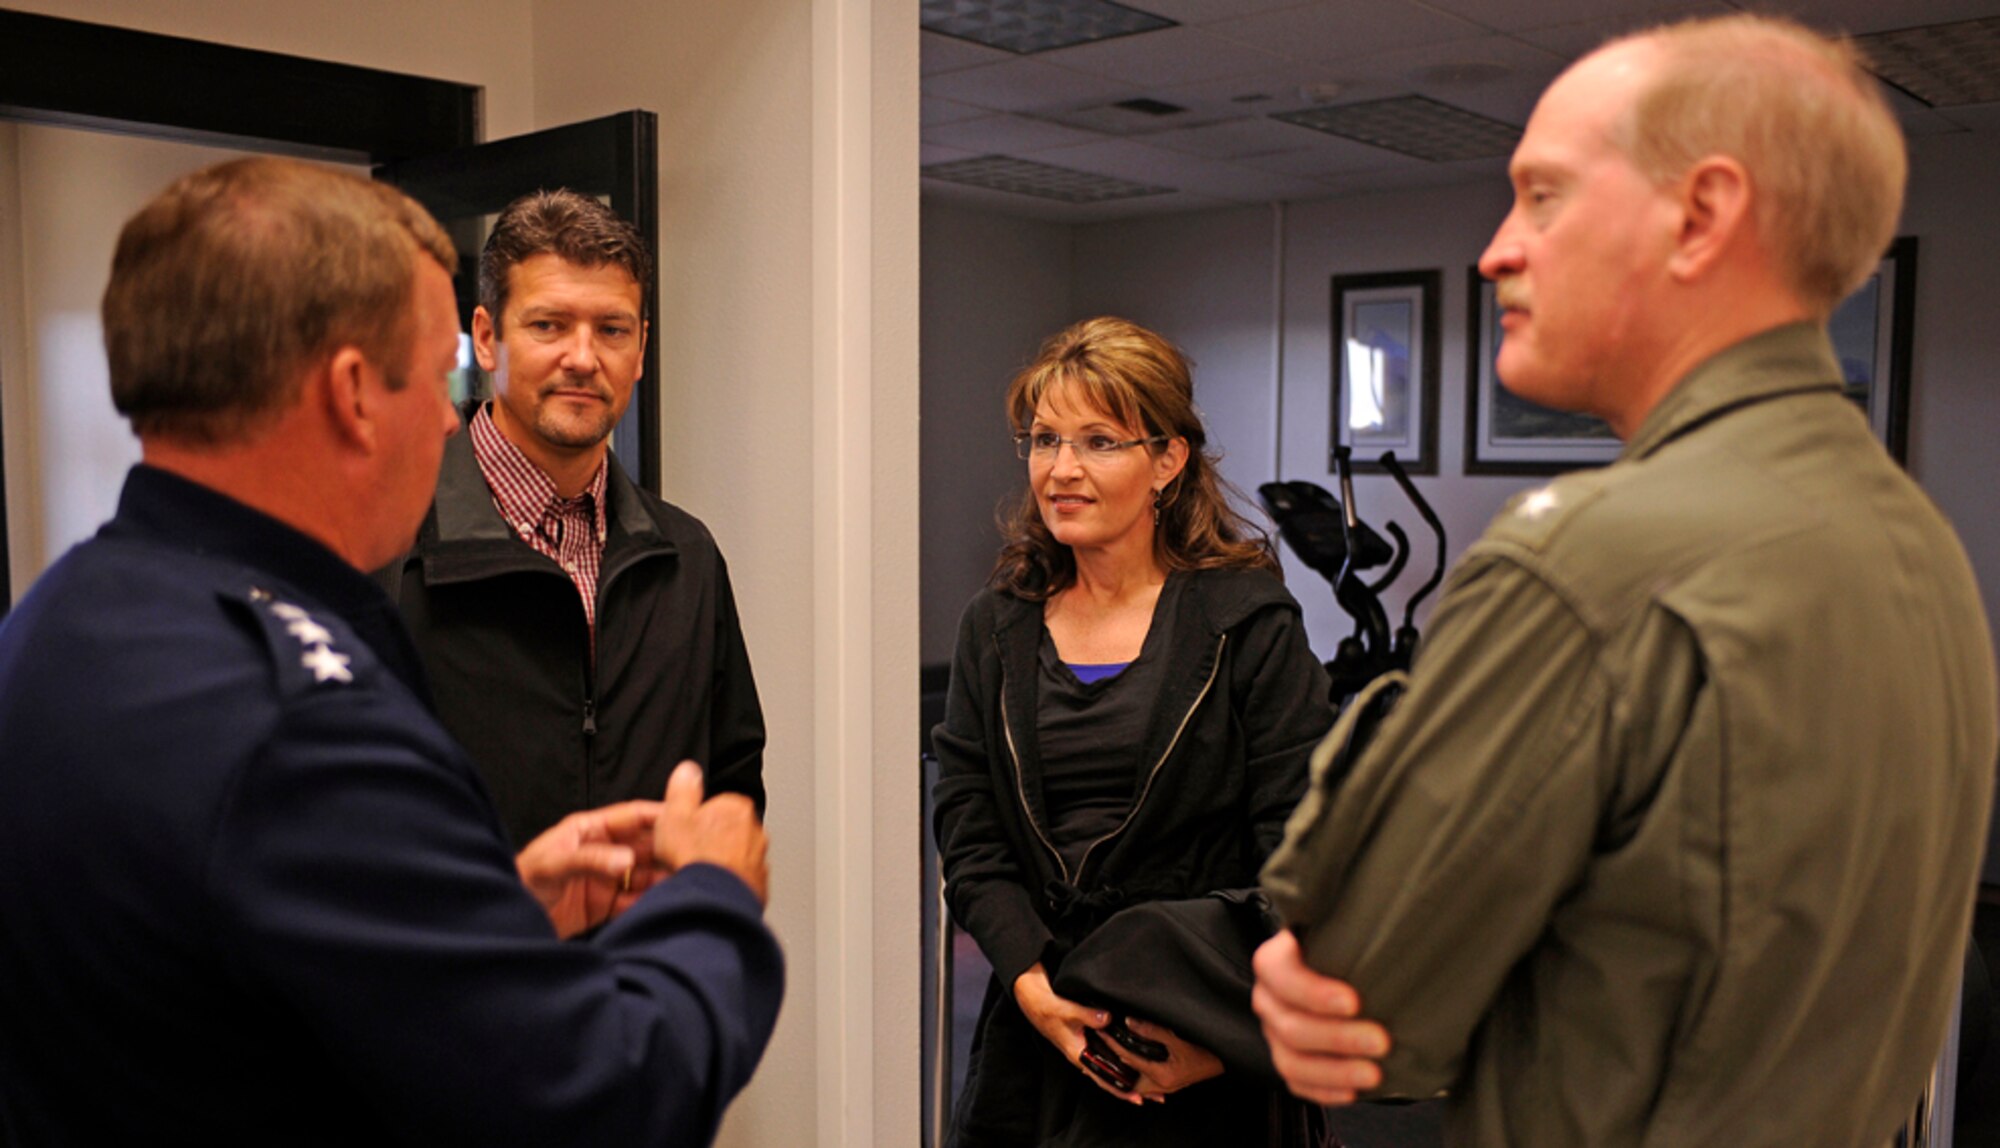 Alaska Governor Sarah Palin and her husband Todd meet with Lt. Gen. Dana T. Atkins, Alaskan Command Commander, 11th Air Force; and Rear Admiral Mark A. Vance, USS John C. Stennis (CVN 74) Strike Group Commander, before heading out to the USS John C. Stennis (CVN 74) during exercise Northern Edge 2009, Elmendorf AFB, Alaska, June 18, 2009.  Northern Edge 2009 is Alaska's largest military training exercise.  It prepares joint forces to respond to crises throughout the Asia-Pacific region.  (Released/U.S. Air Force photo by TSgt Dennis J. Henry Jr.)